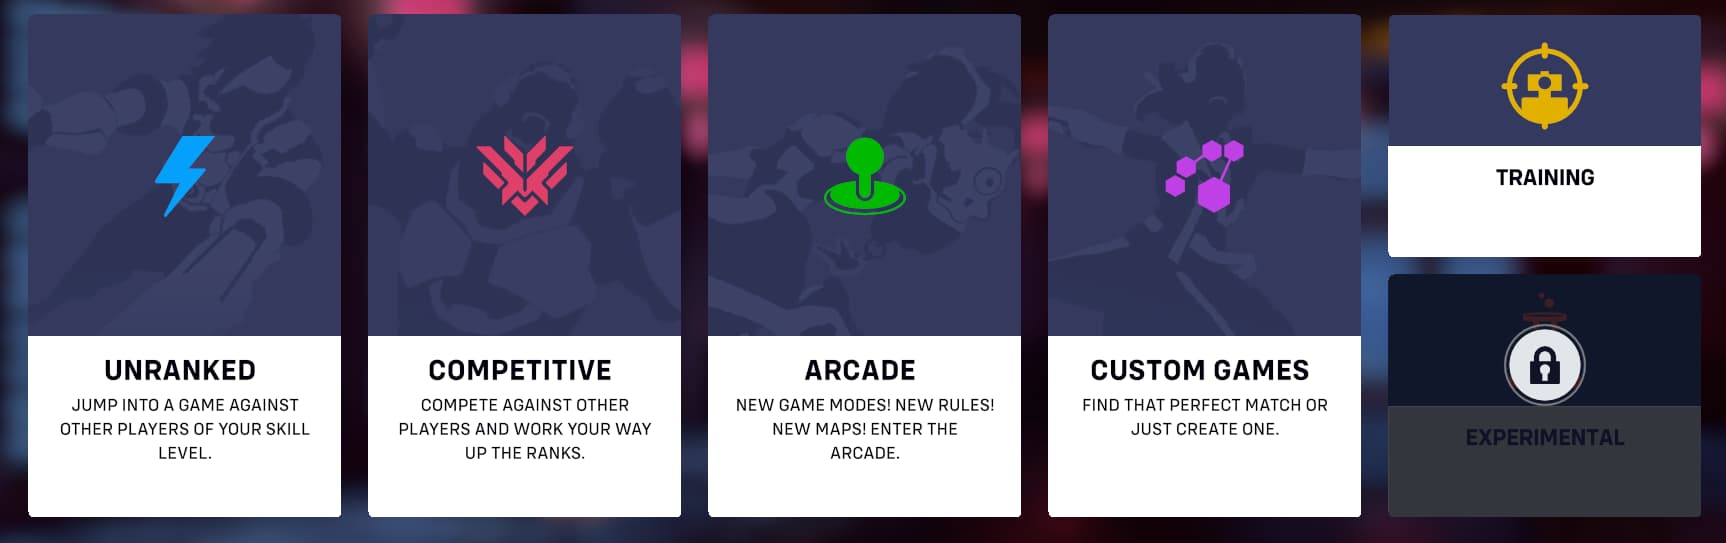 experimental game mode overwatch 2